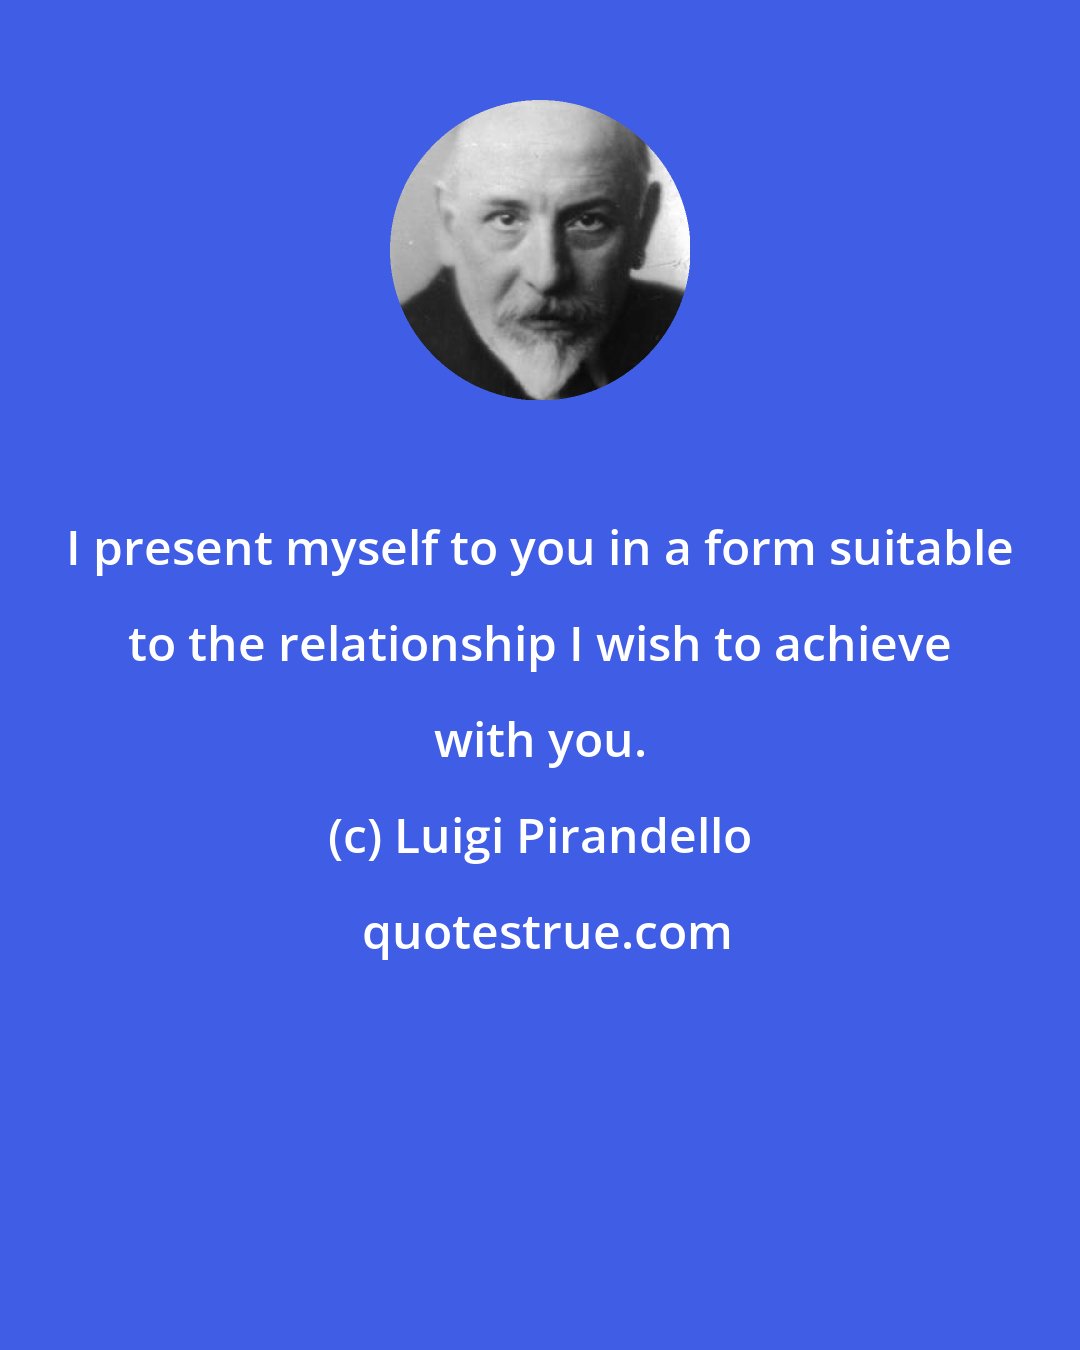 Luigi Pirandello: I present myself to you in a form suitable to the relationship I wish to achieve with you.